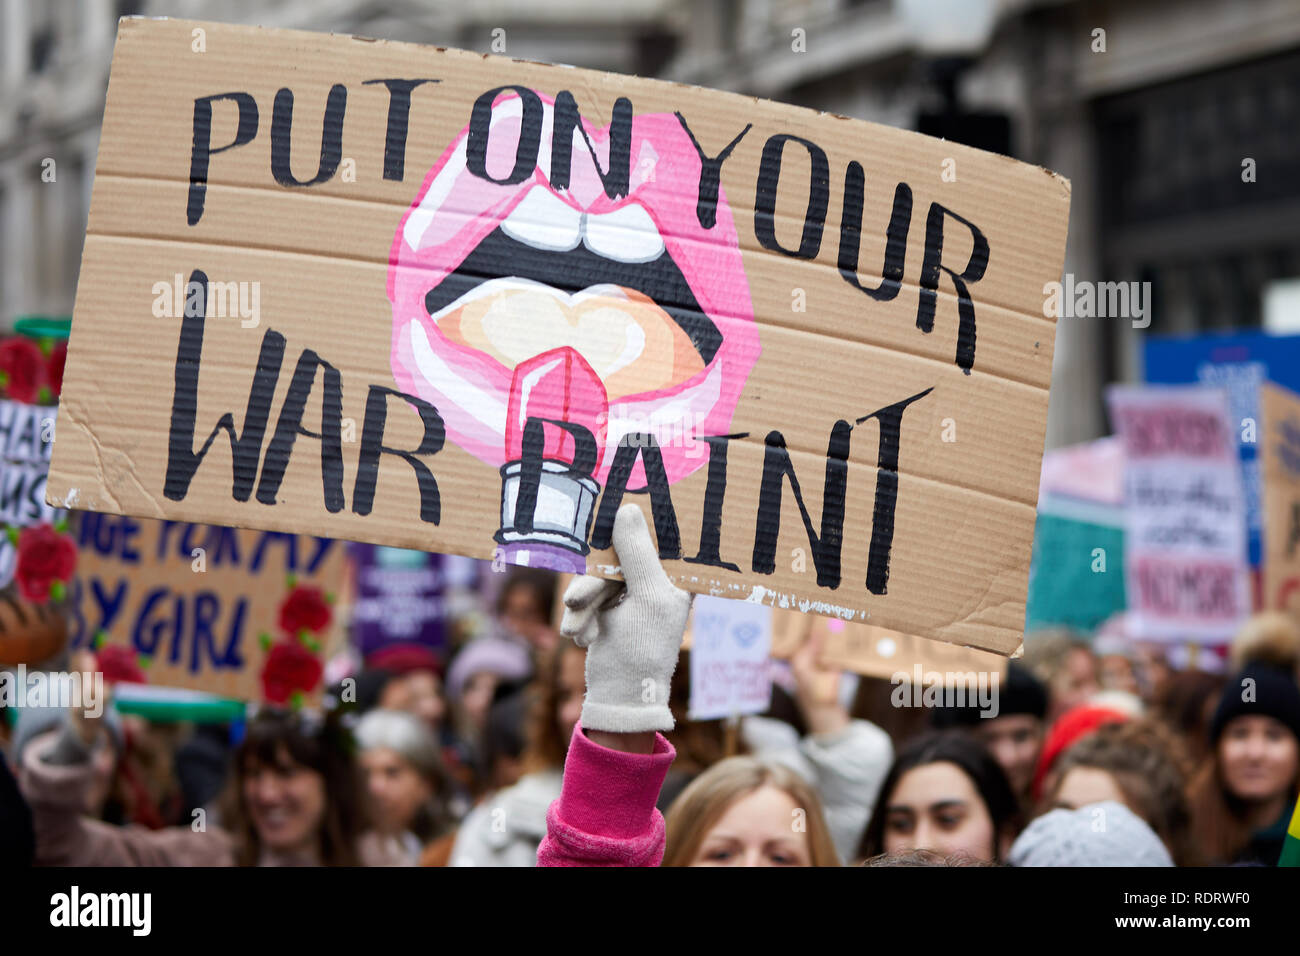 London, UK. - Jan 19, 2019: A placard displayed by a protestor during the Bread and Roses women’s march through London. Stock Photo